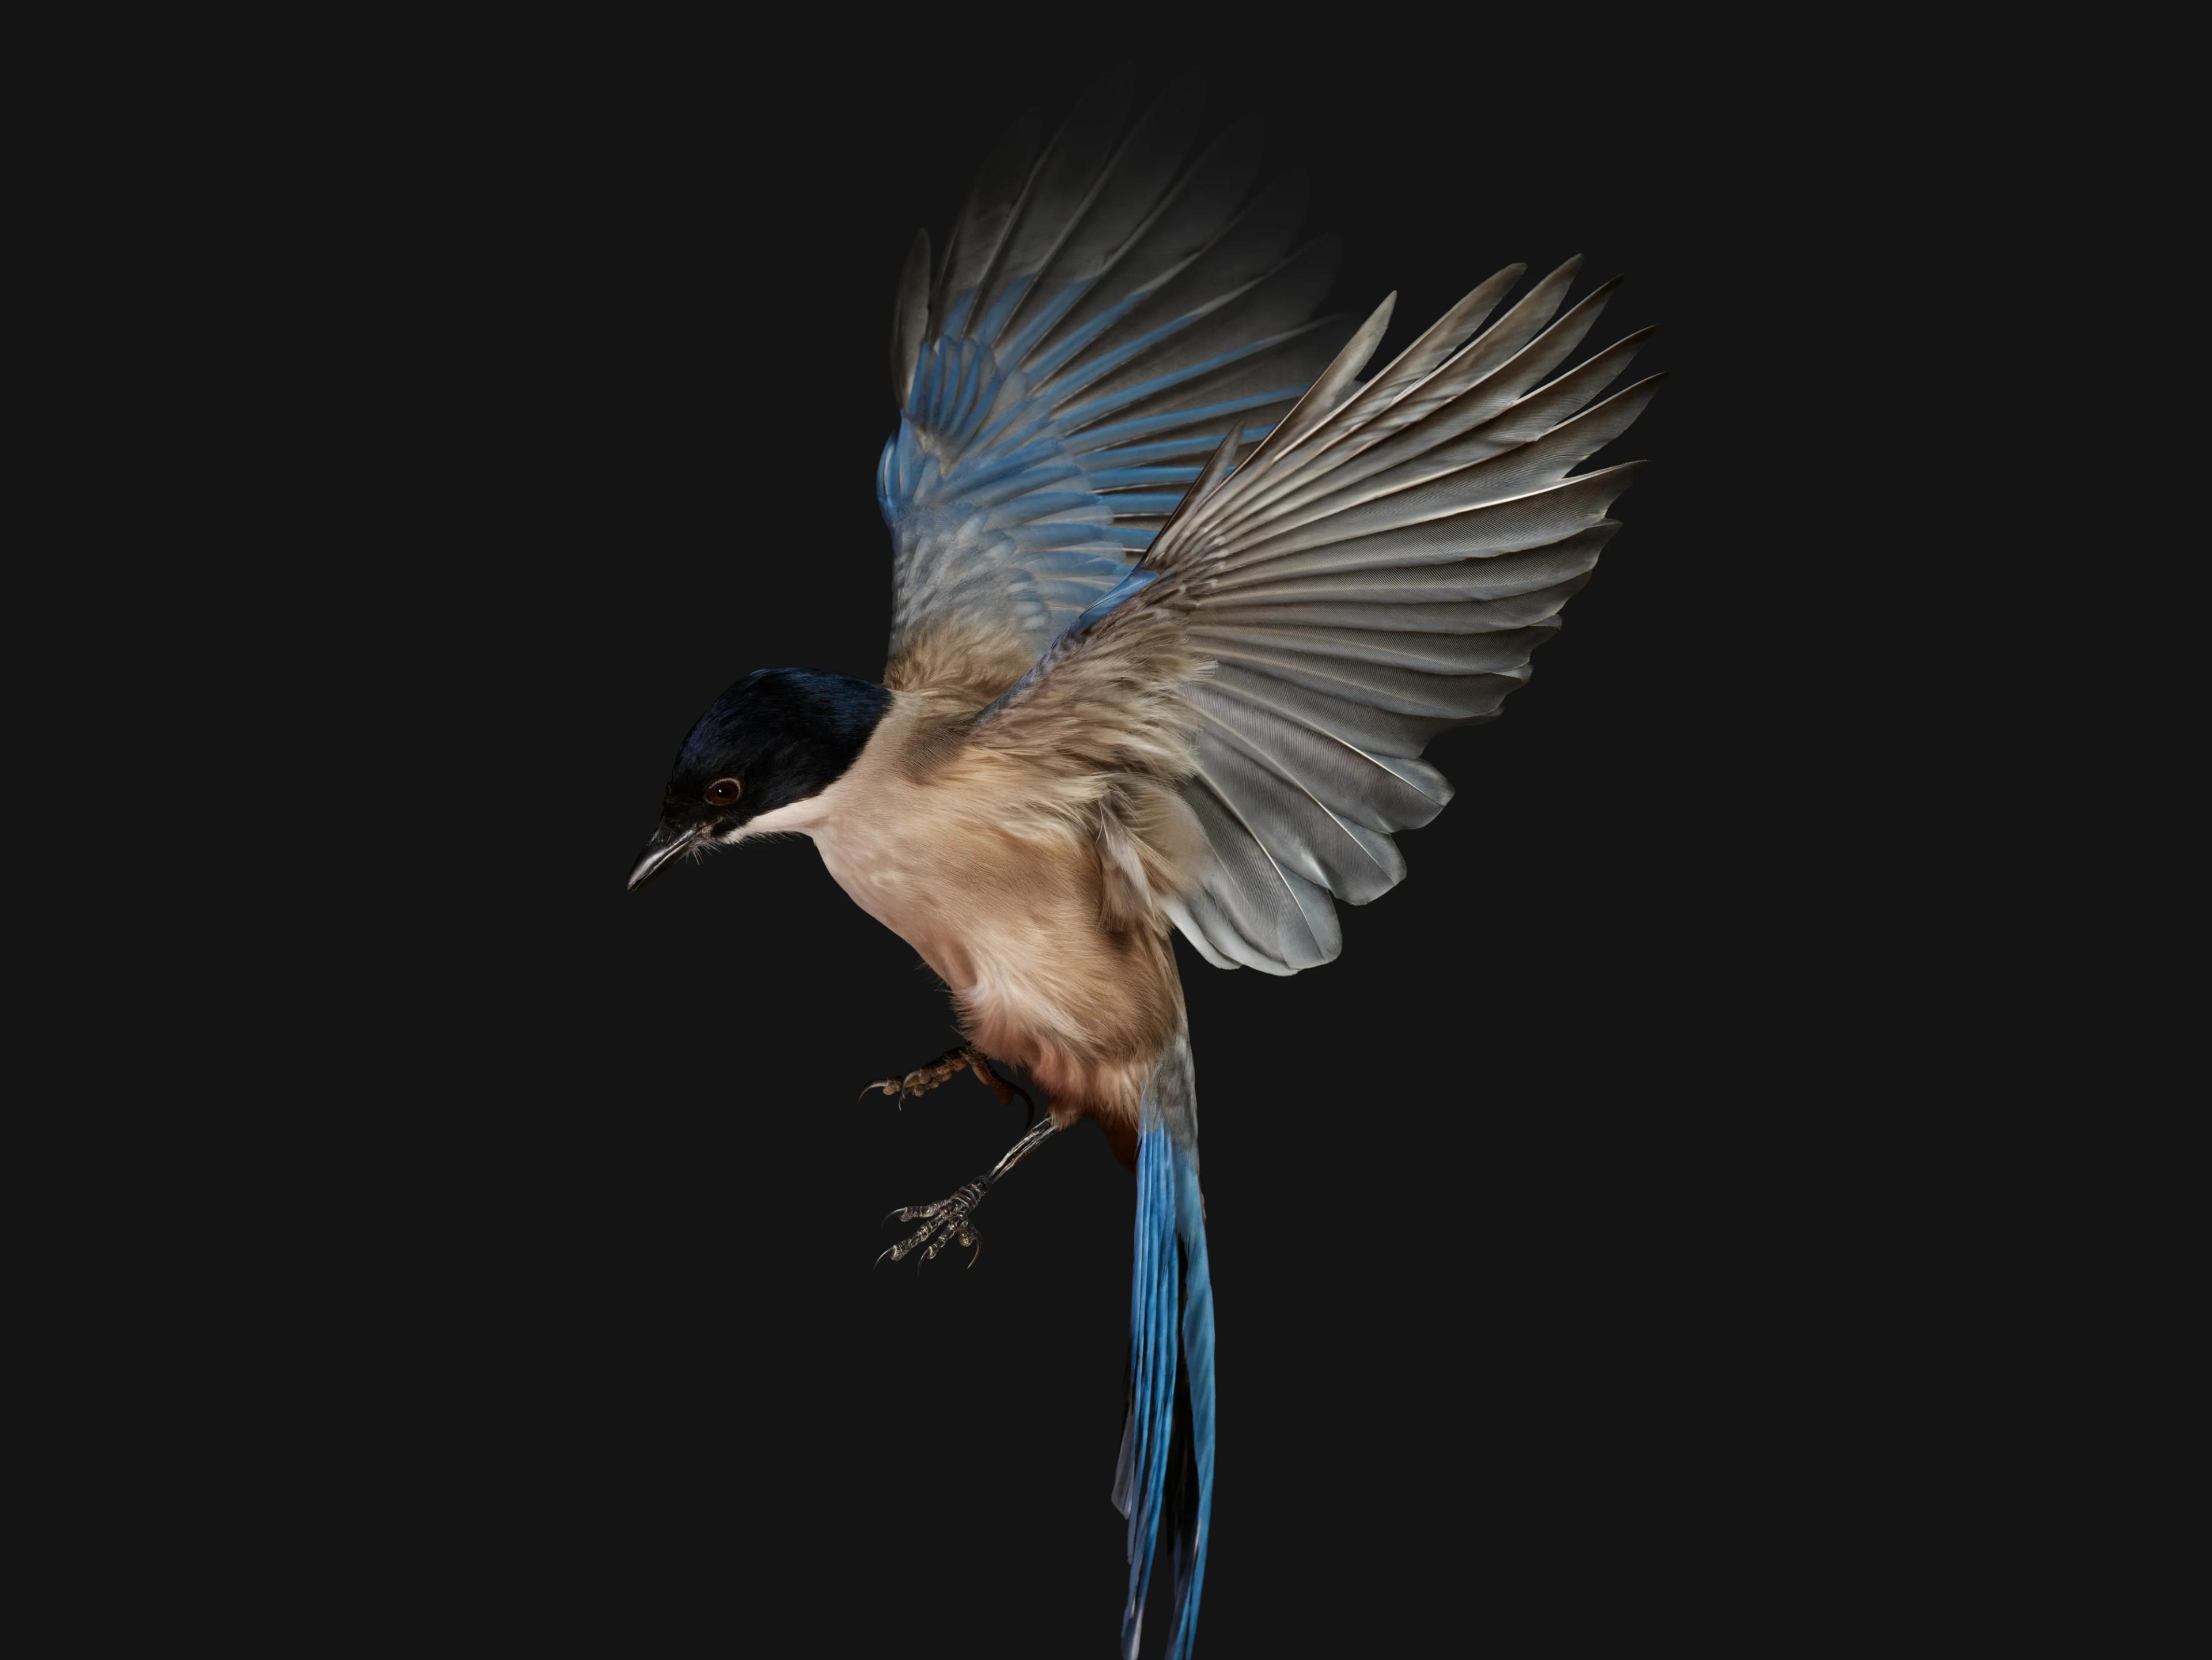 Blue Azure Jay in air with wings spread on black background